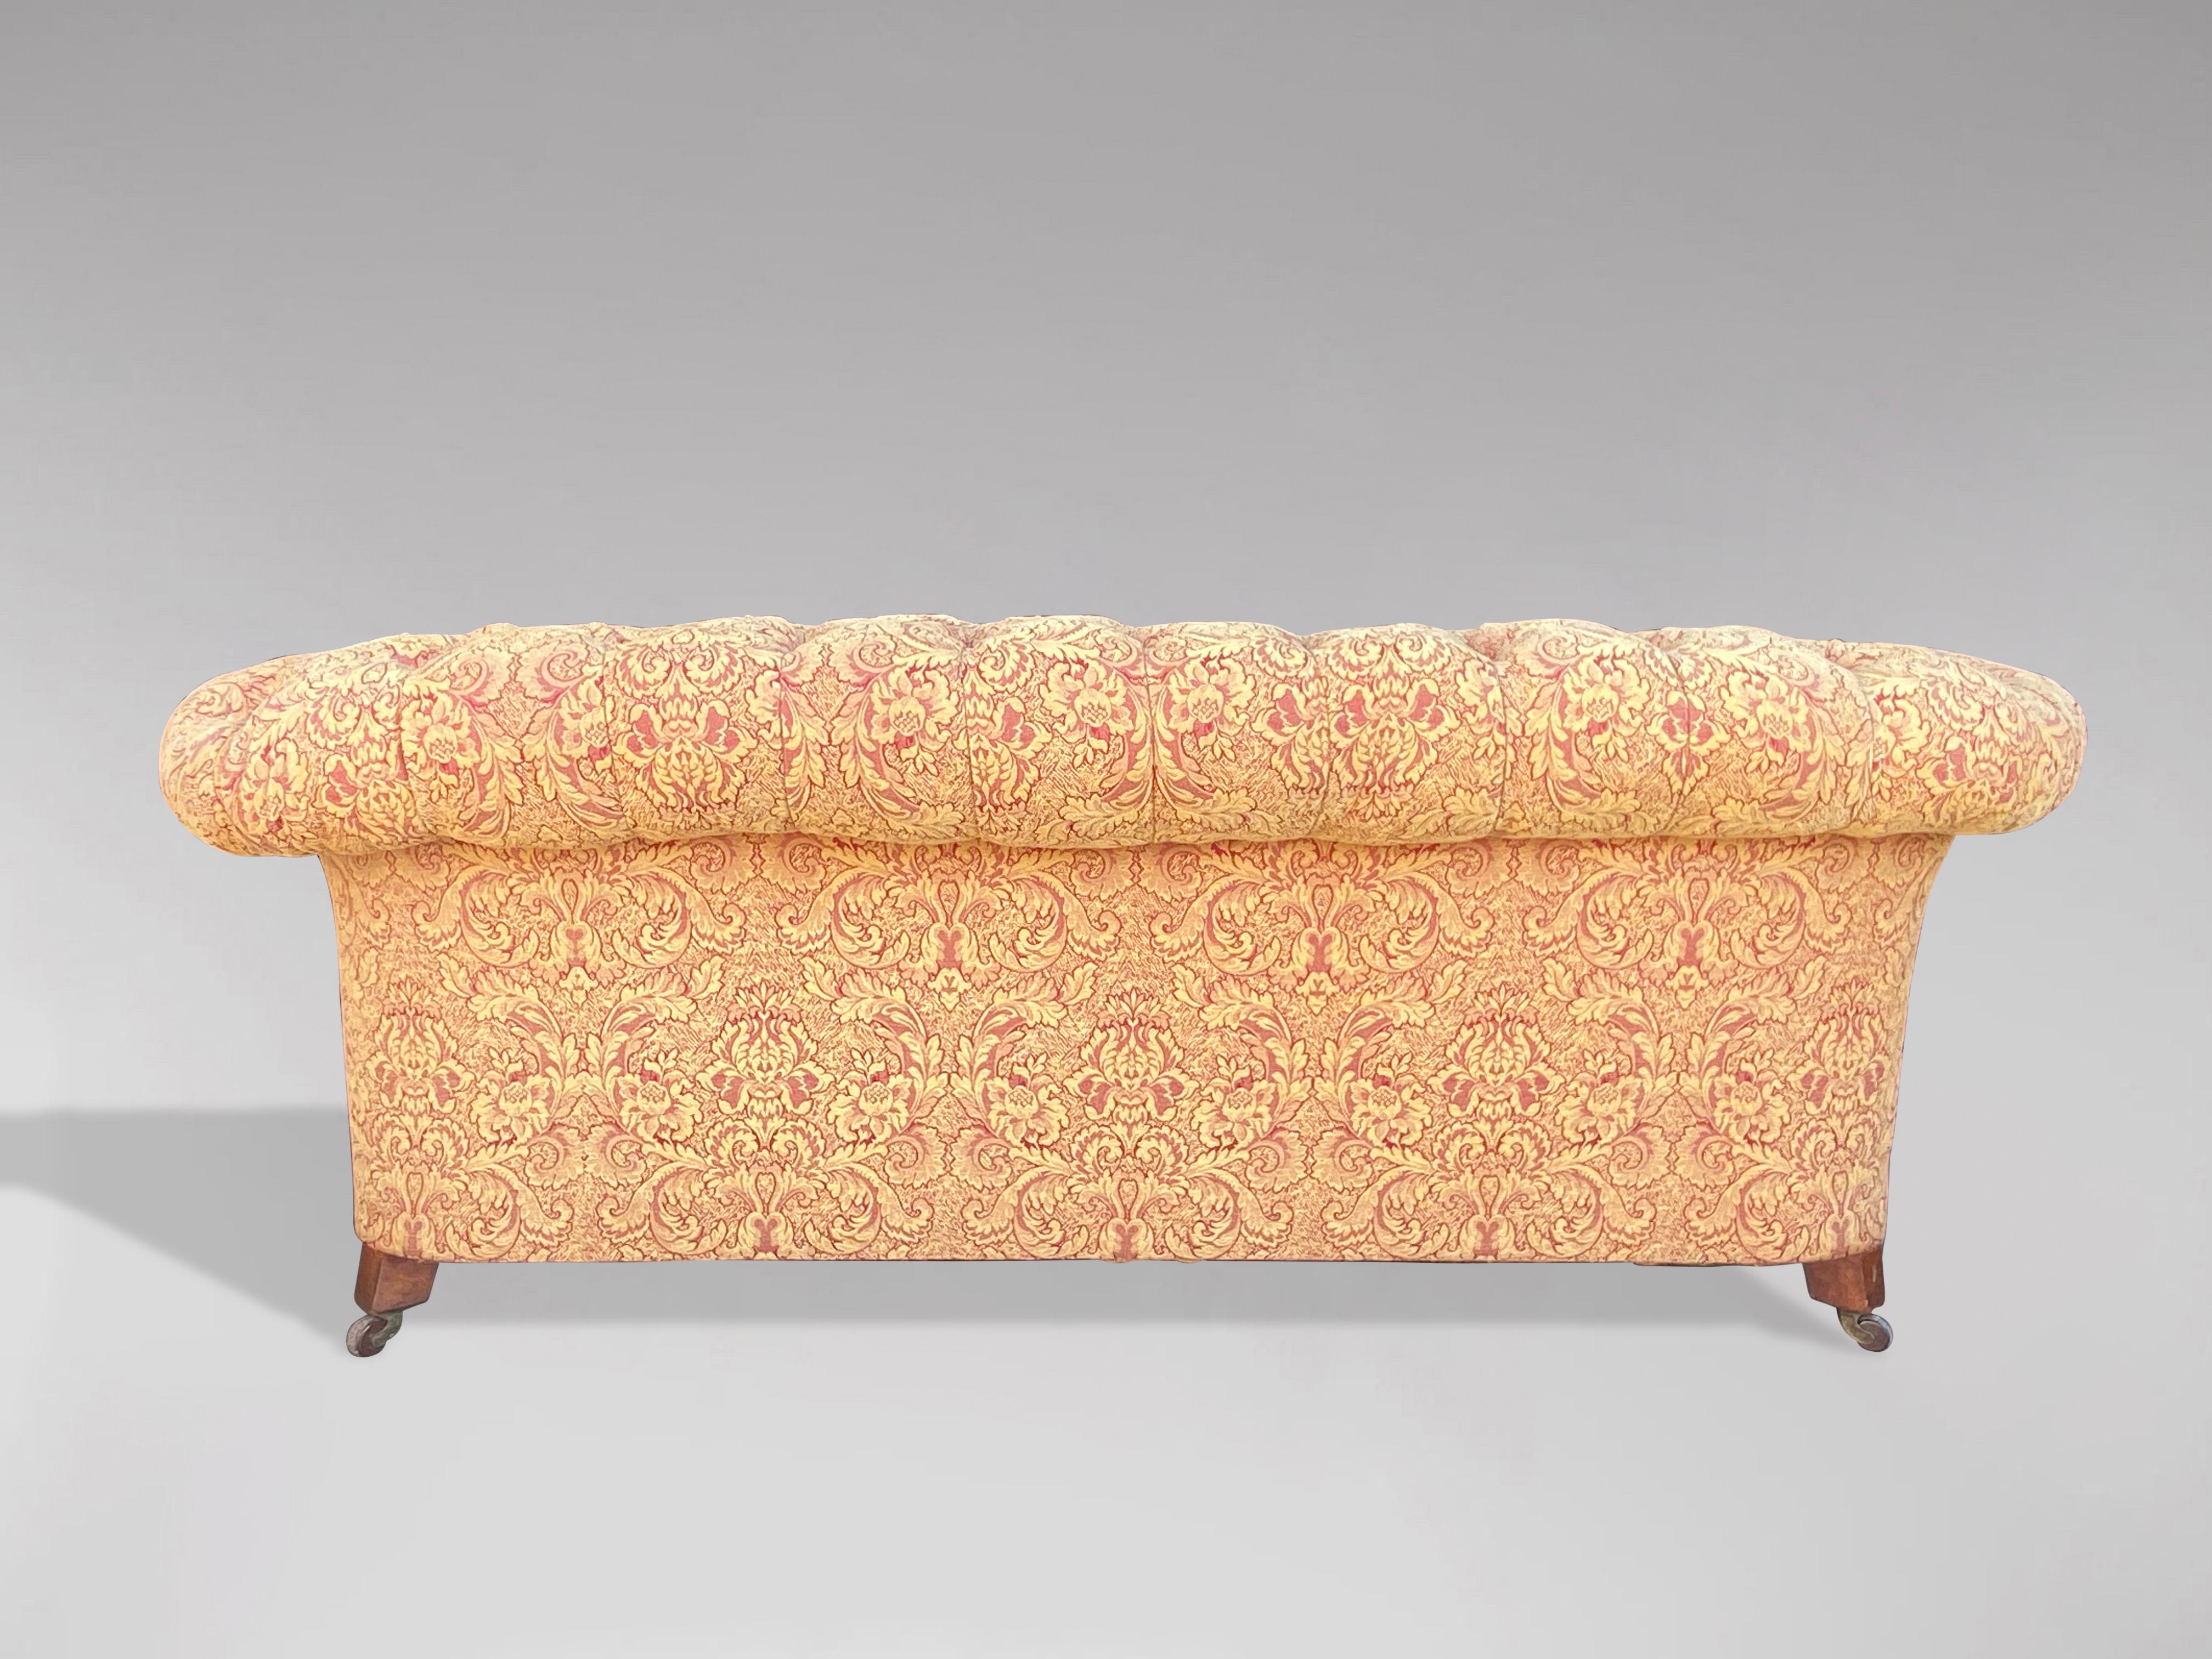 British 19th Century Victorian Period Upholstered Chesterfield Sofa